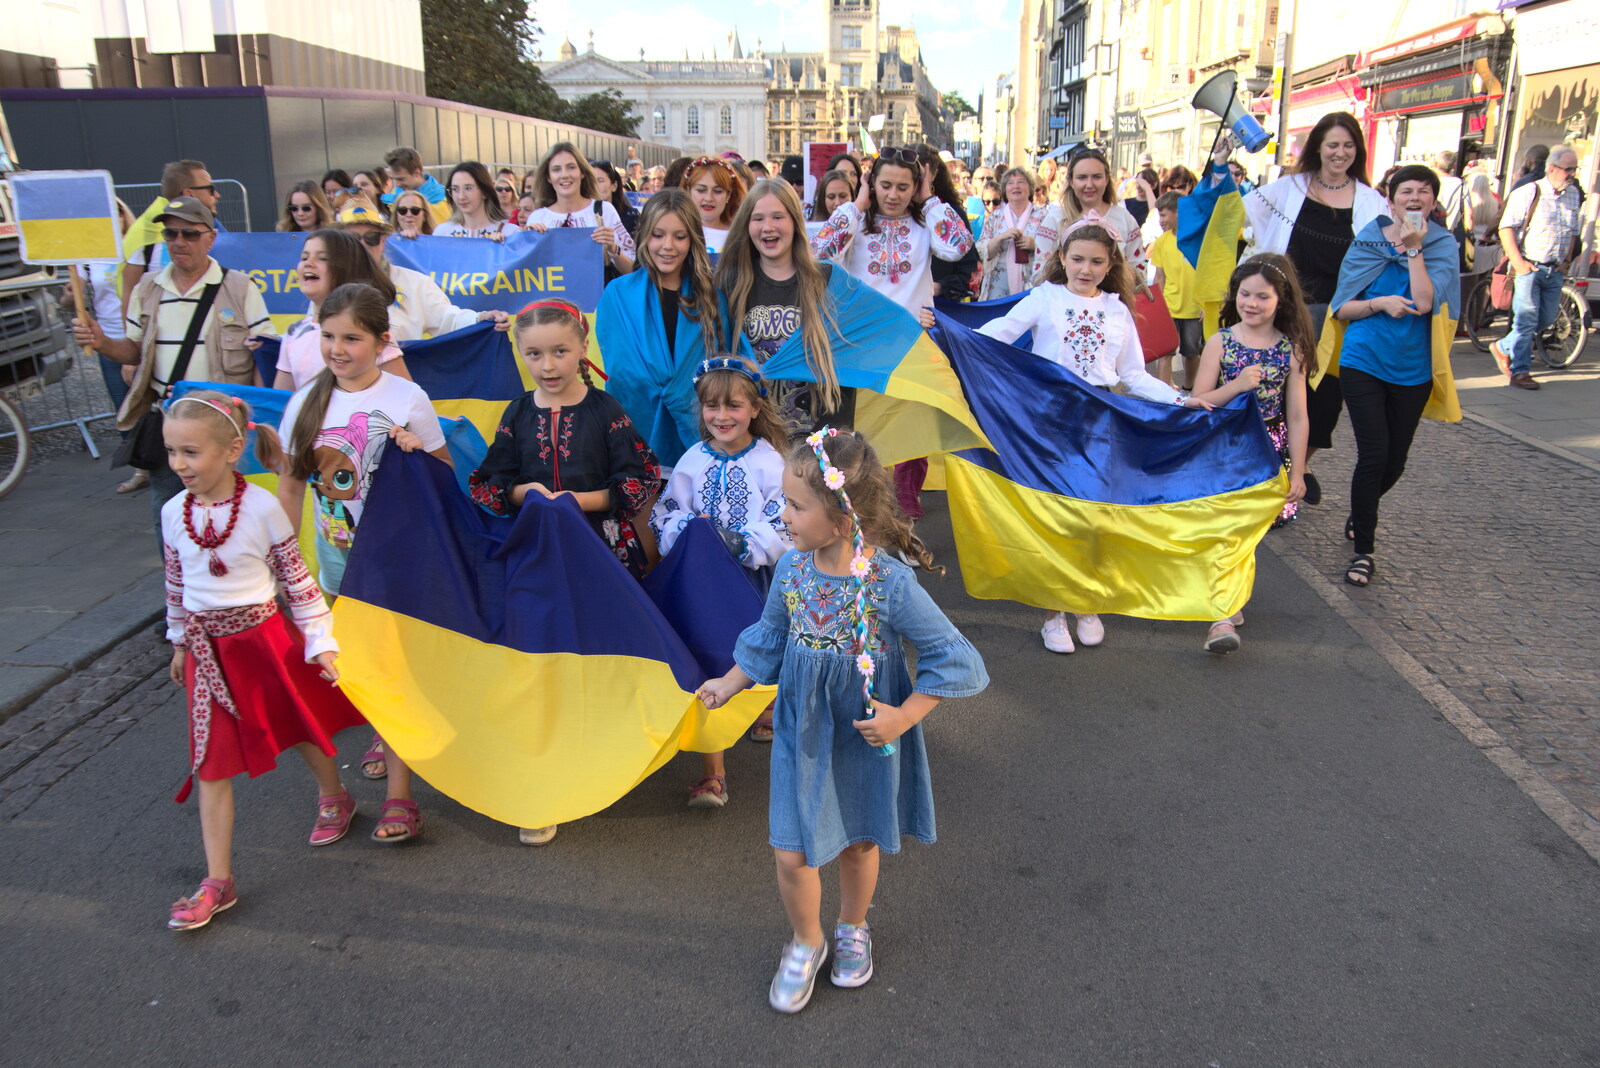 Heading down King's Parade from Anglesey Abbey and a #StandWithUkraine Demo, Cambridge - 24th August 2022